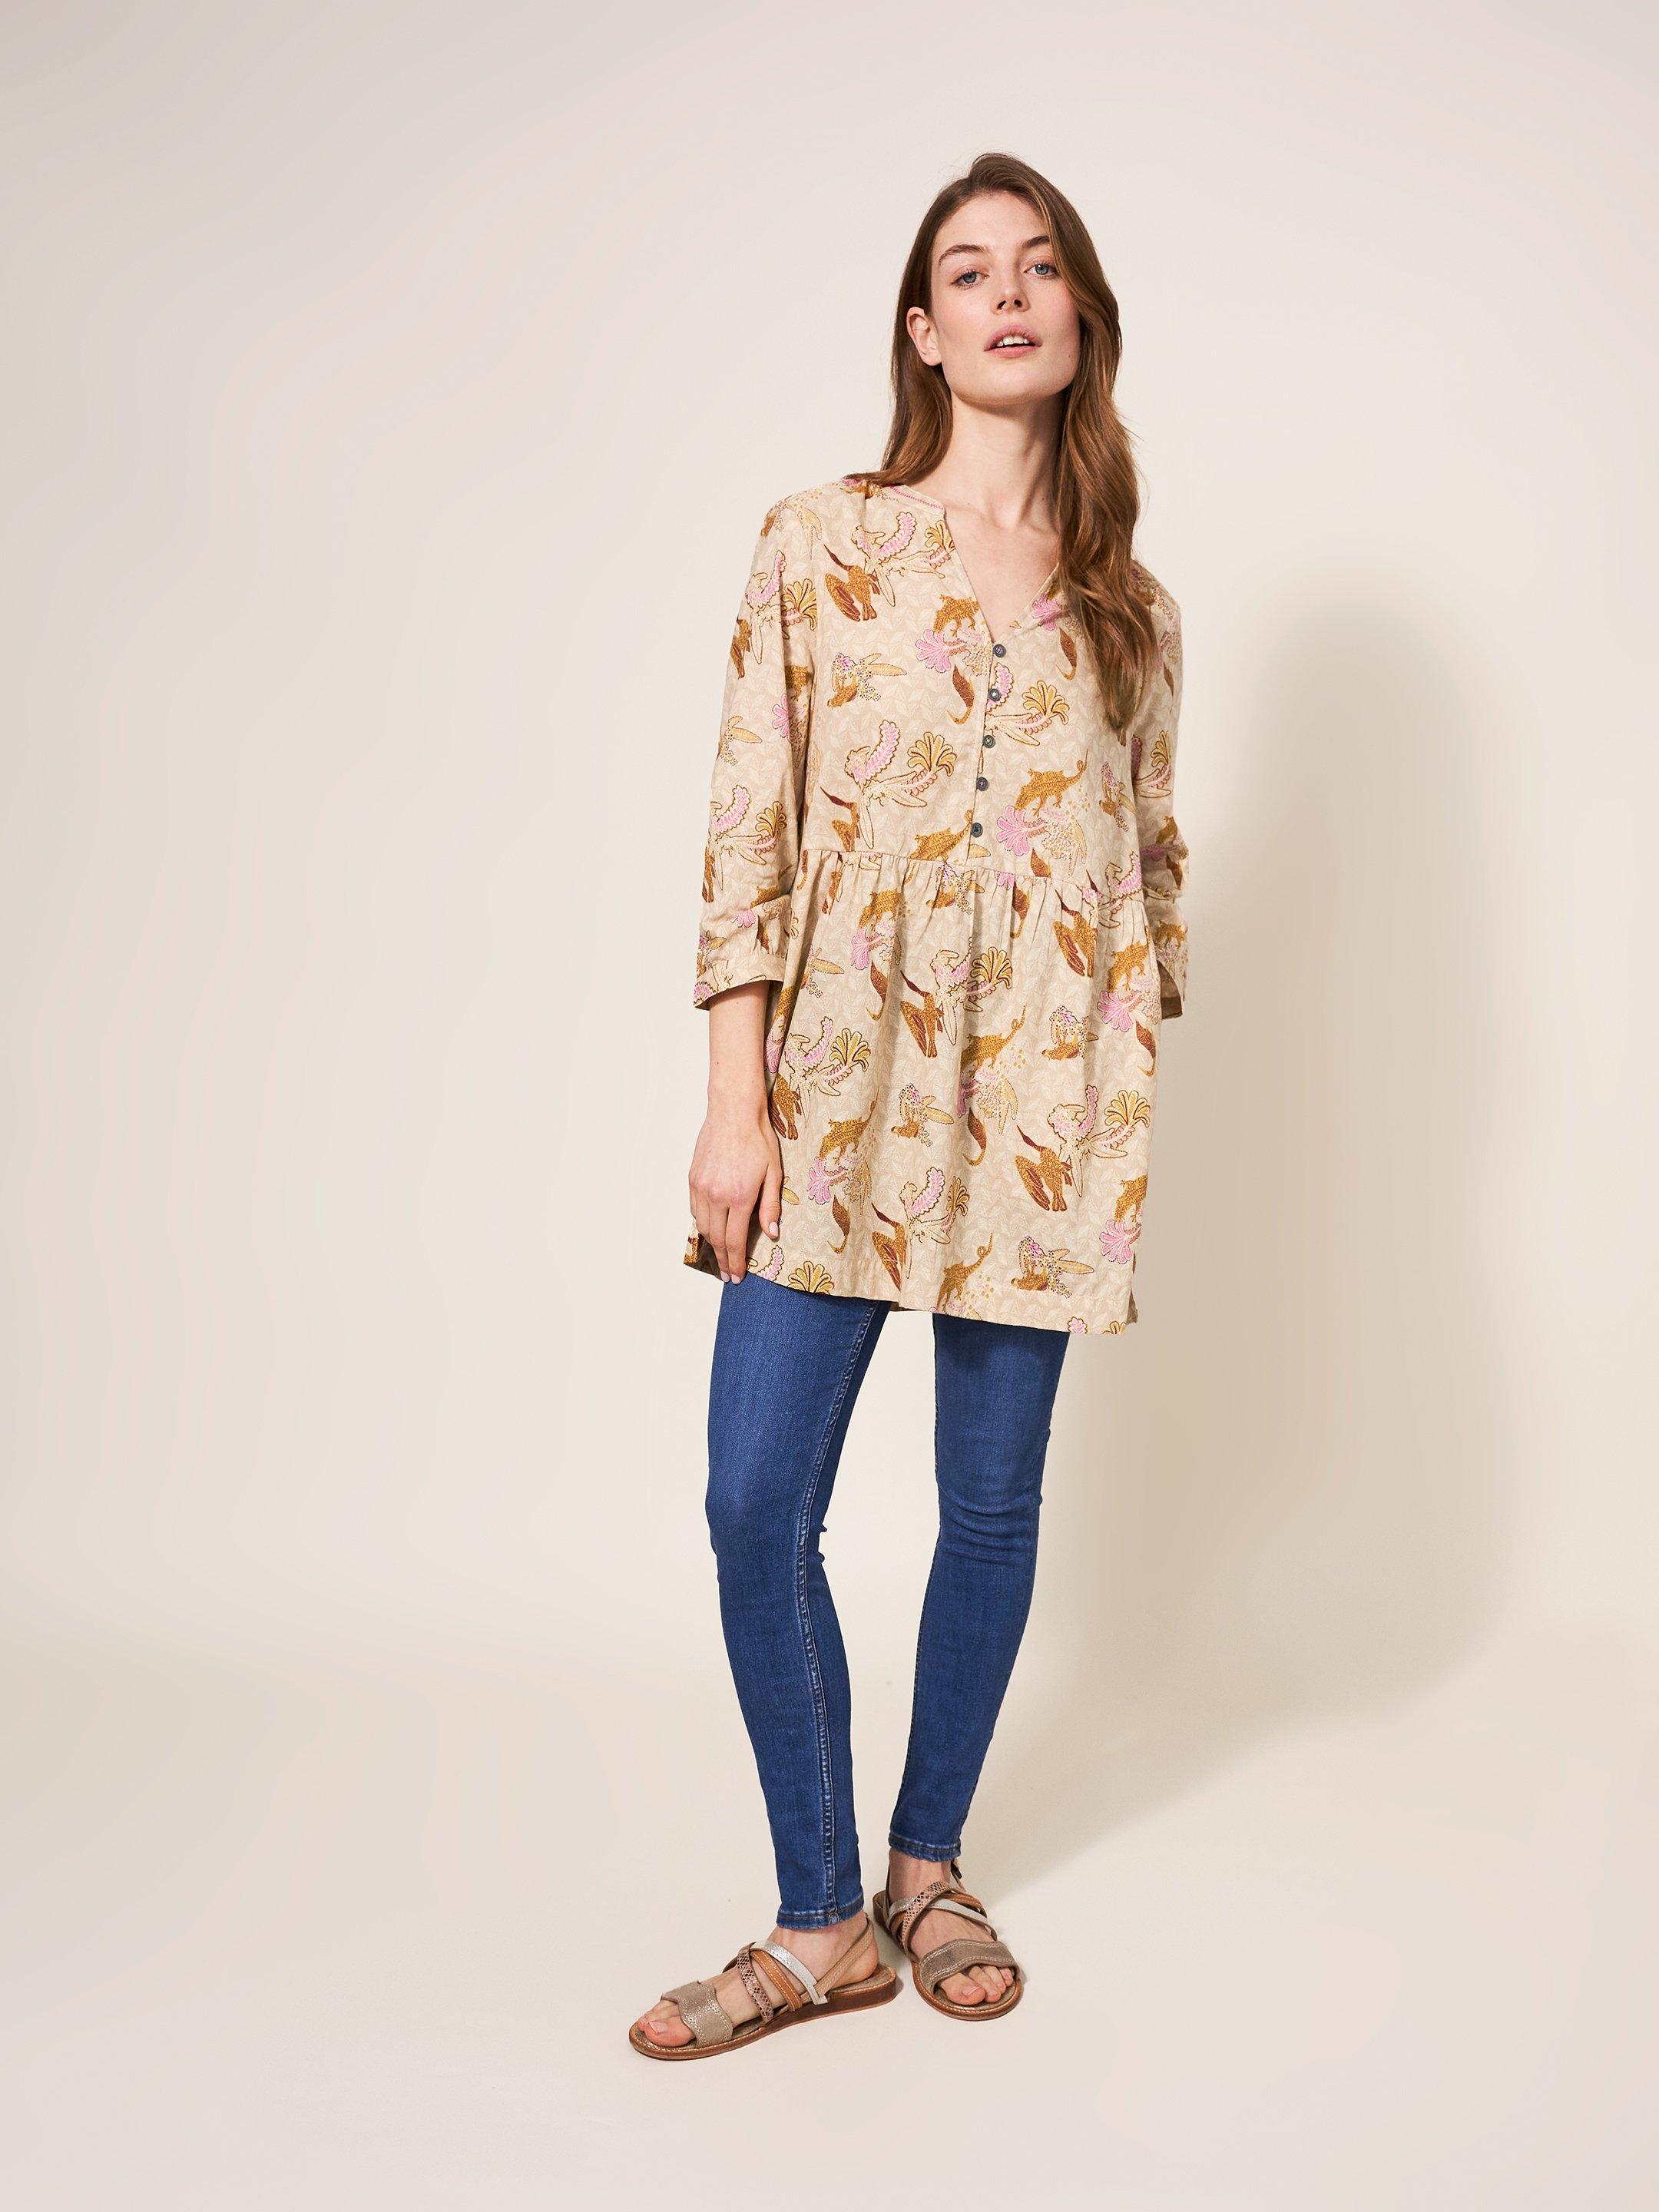 Daphne Tunic in NAT MLT - MODEL FRONT